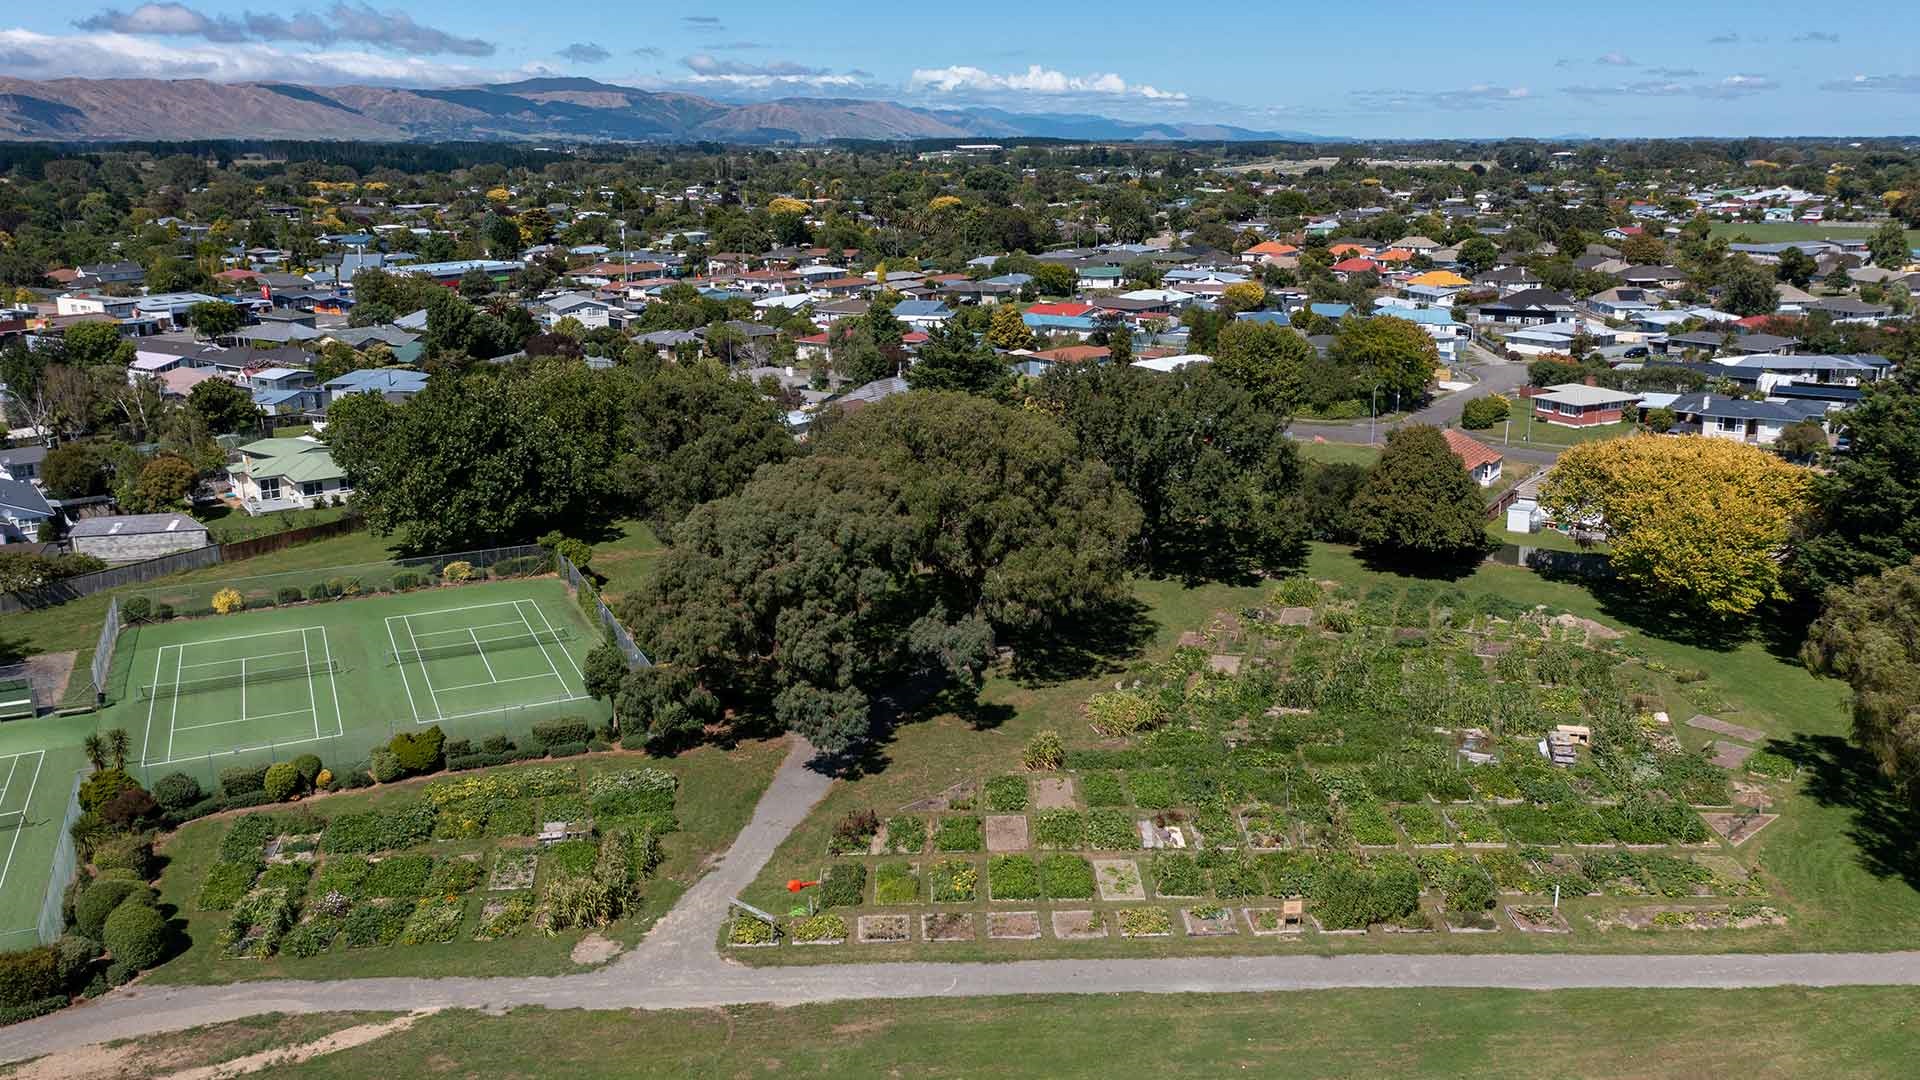 Aerial view of two tennis courts sitting next to community vegetable gardens